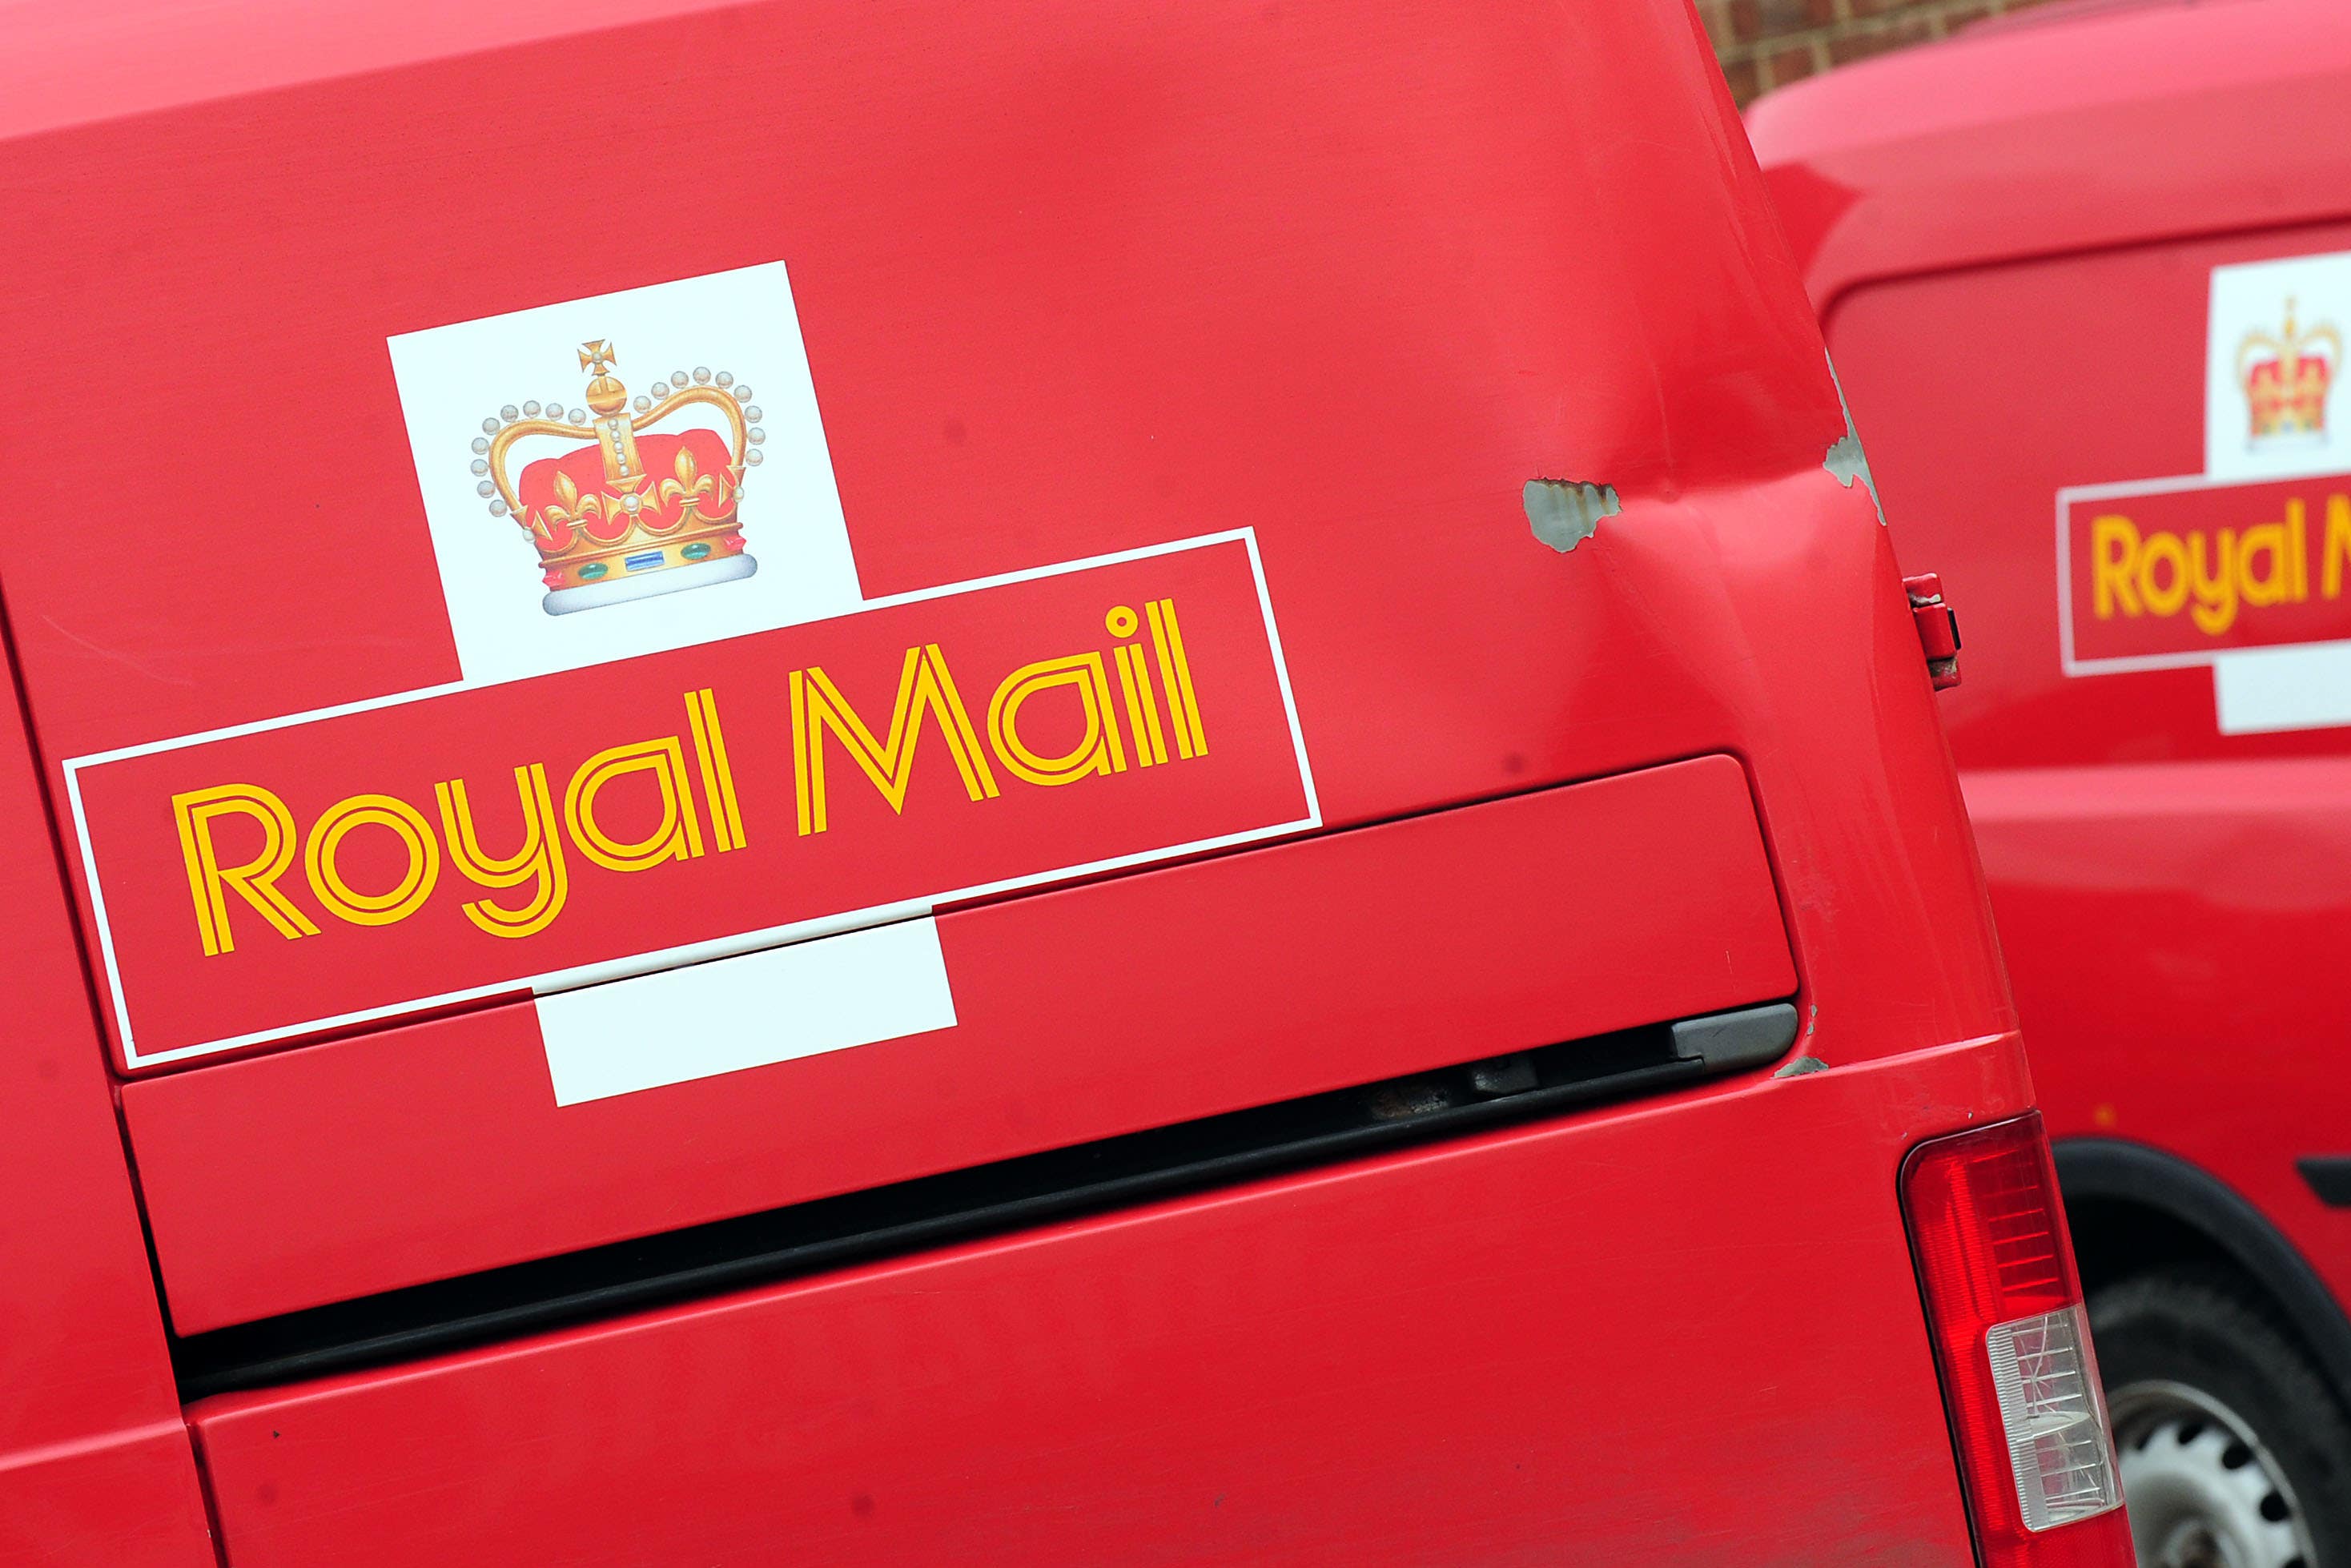 ‘We would like to sincerely apologise to impacted customers for any disruption this incident may be causing,’ said the Royal Mail (Rui Vieira/PA)